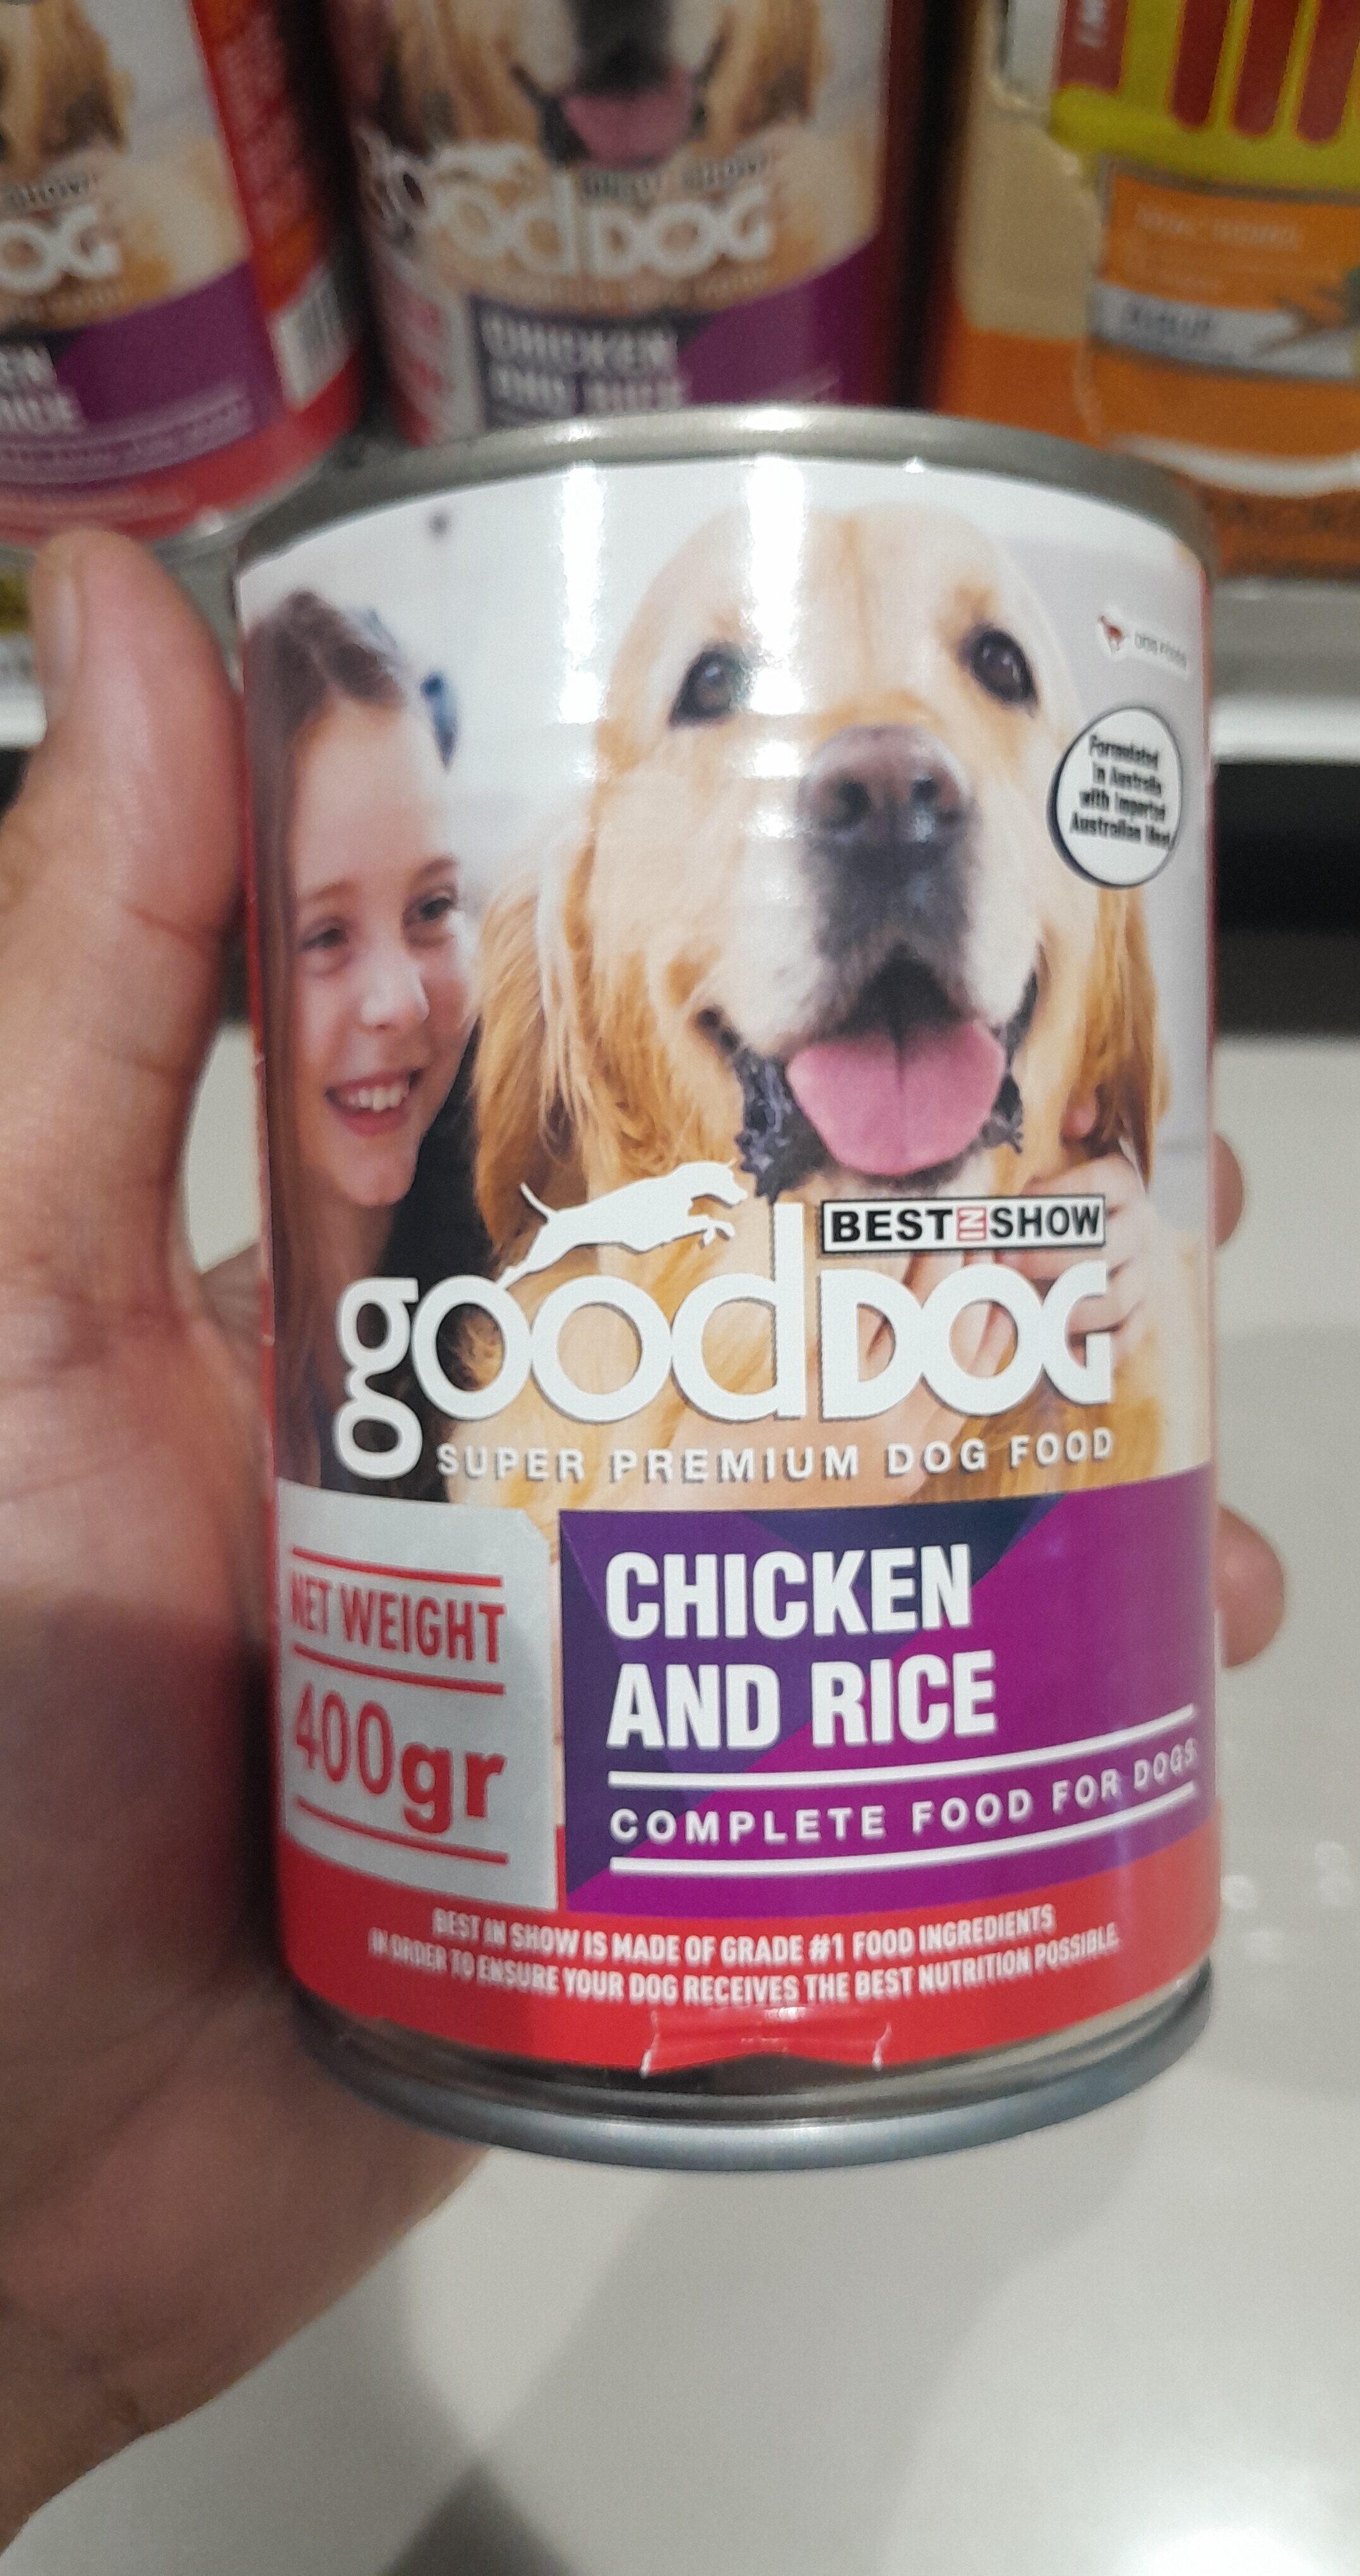 Good dog chicken with beef rice 400gr - Product - id